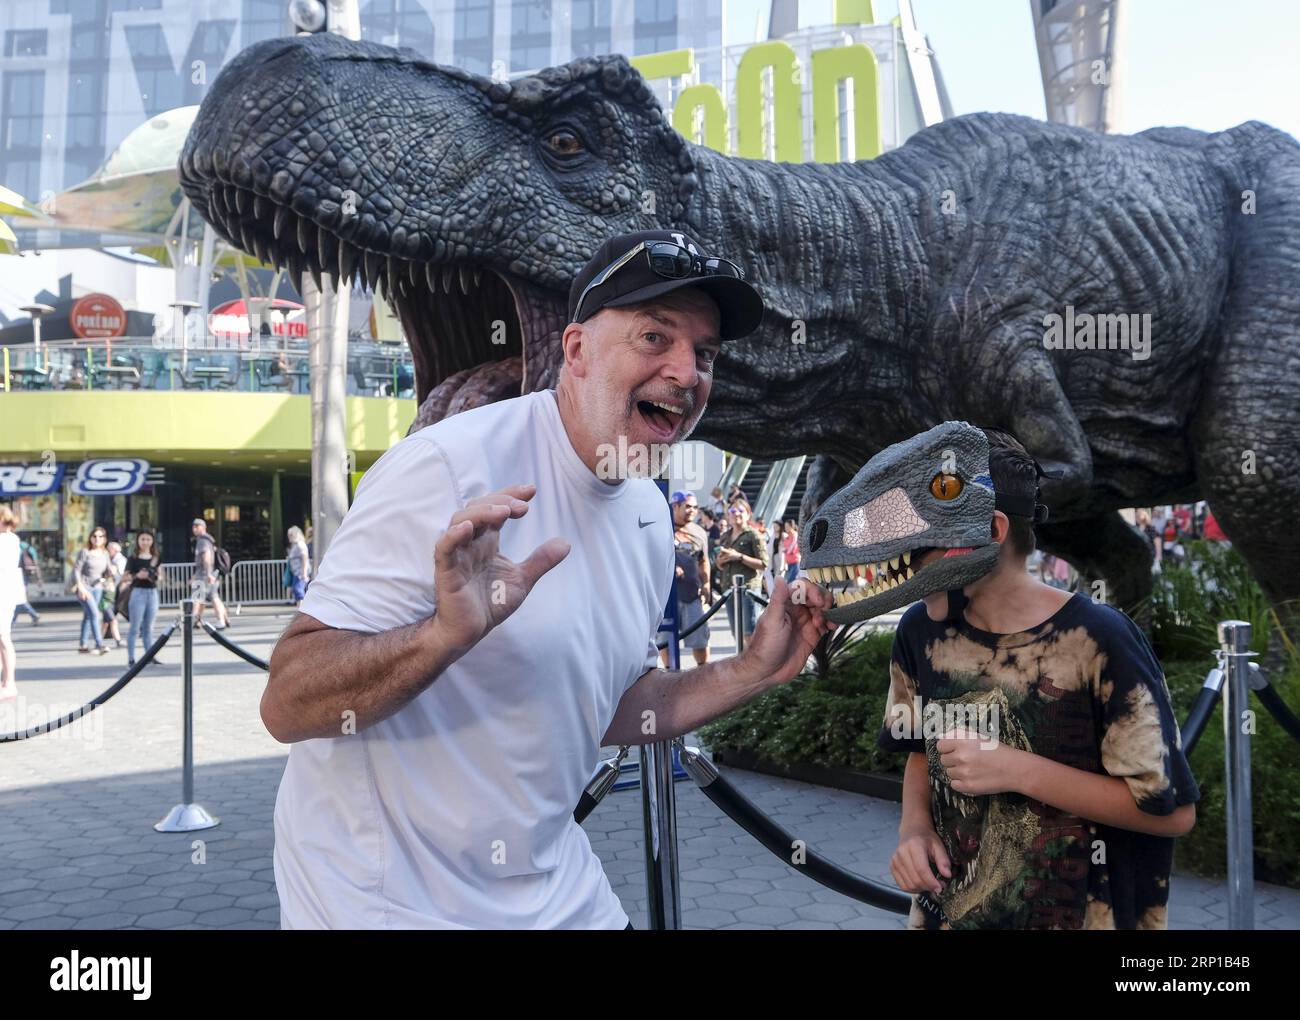 (180622) -- LOS ANGELES, June 22, 2018 -- People pose for pictures with a giant Tyrannosaurus rex statue at Universal CityWalk in Los Angeles, United States on June 21, 2018. For the promotion of the screening of the new film Jurassic World: Fallen Kingdom on Universal Cinema Theatres, a colossal 3-ton Tyrannosaurus rex, a life-sized Gyrosphere original movie prop, as well as original costume, are displayed for public at Universal CityWalk. ) (zxj) U.S.-LOS ANGELES-DINOSAUR-STATUE ZhaoxHanrong PUBLICATIONxNOTxINxCHN Stock Photo